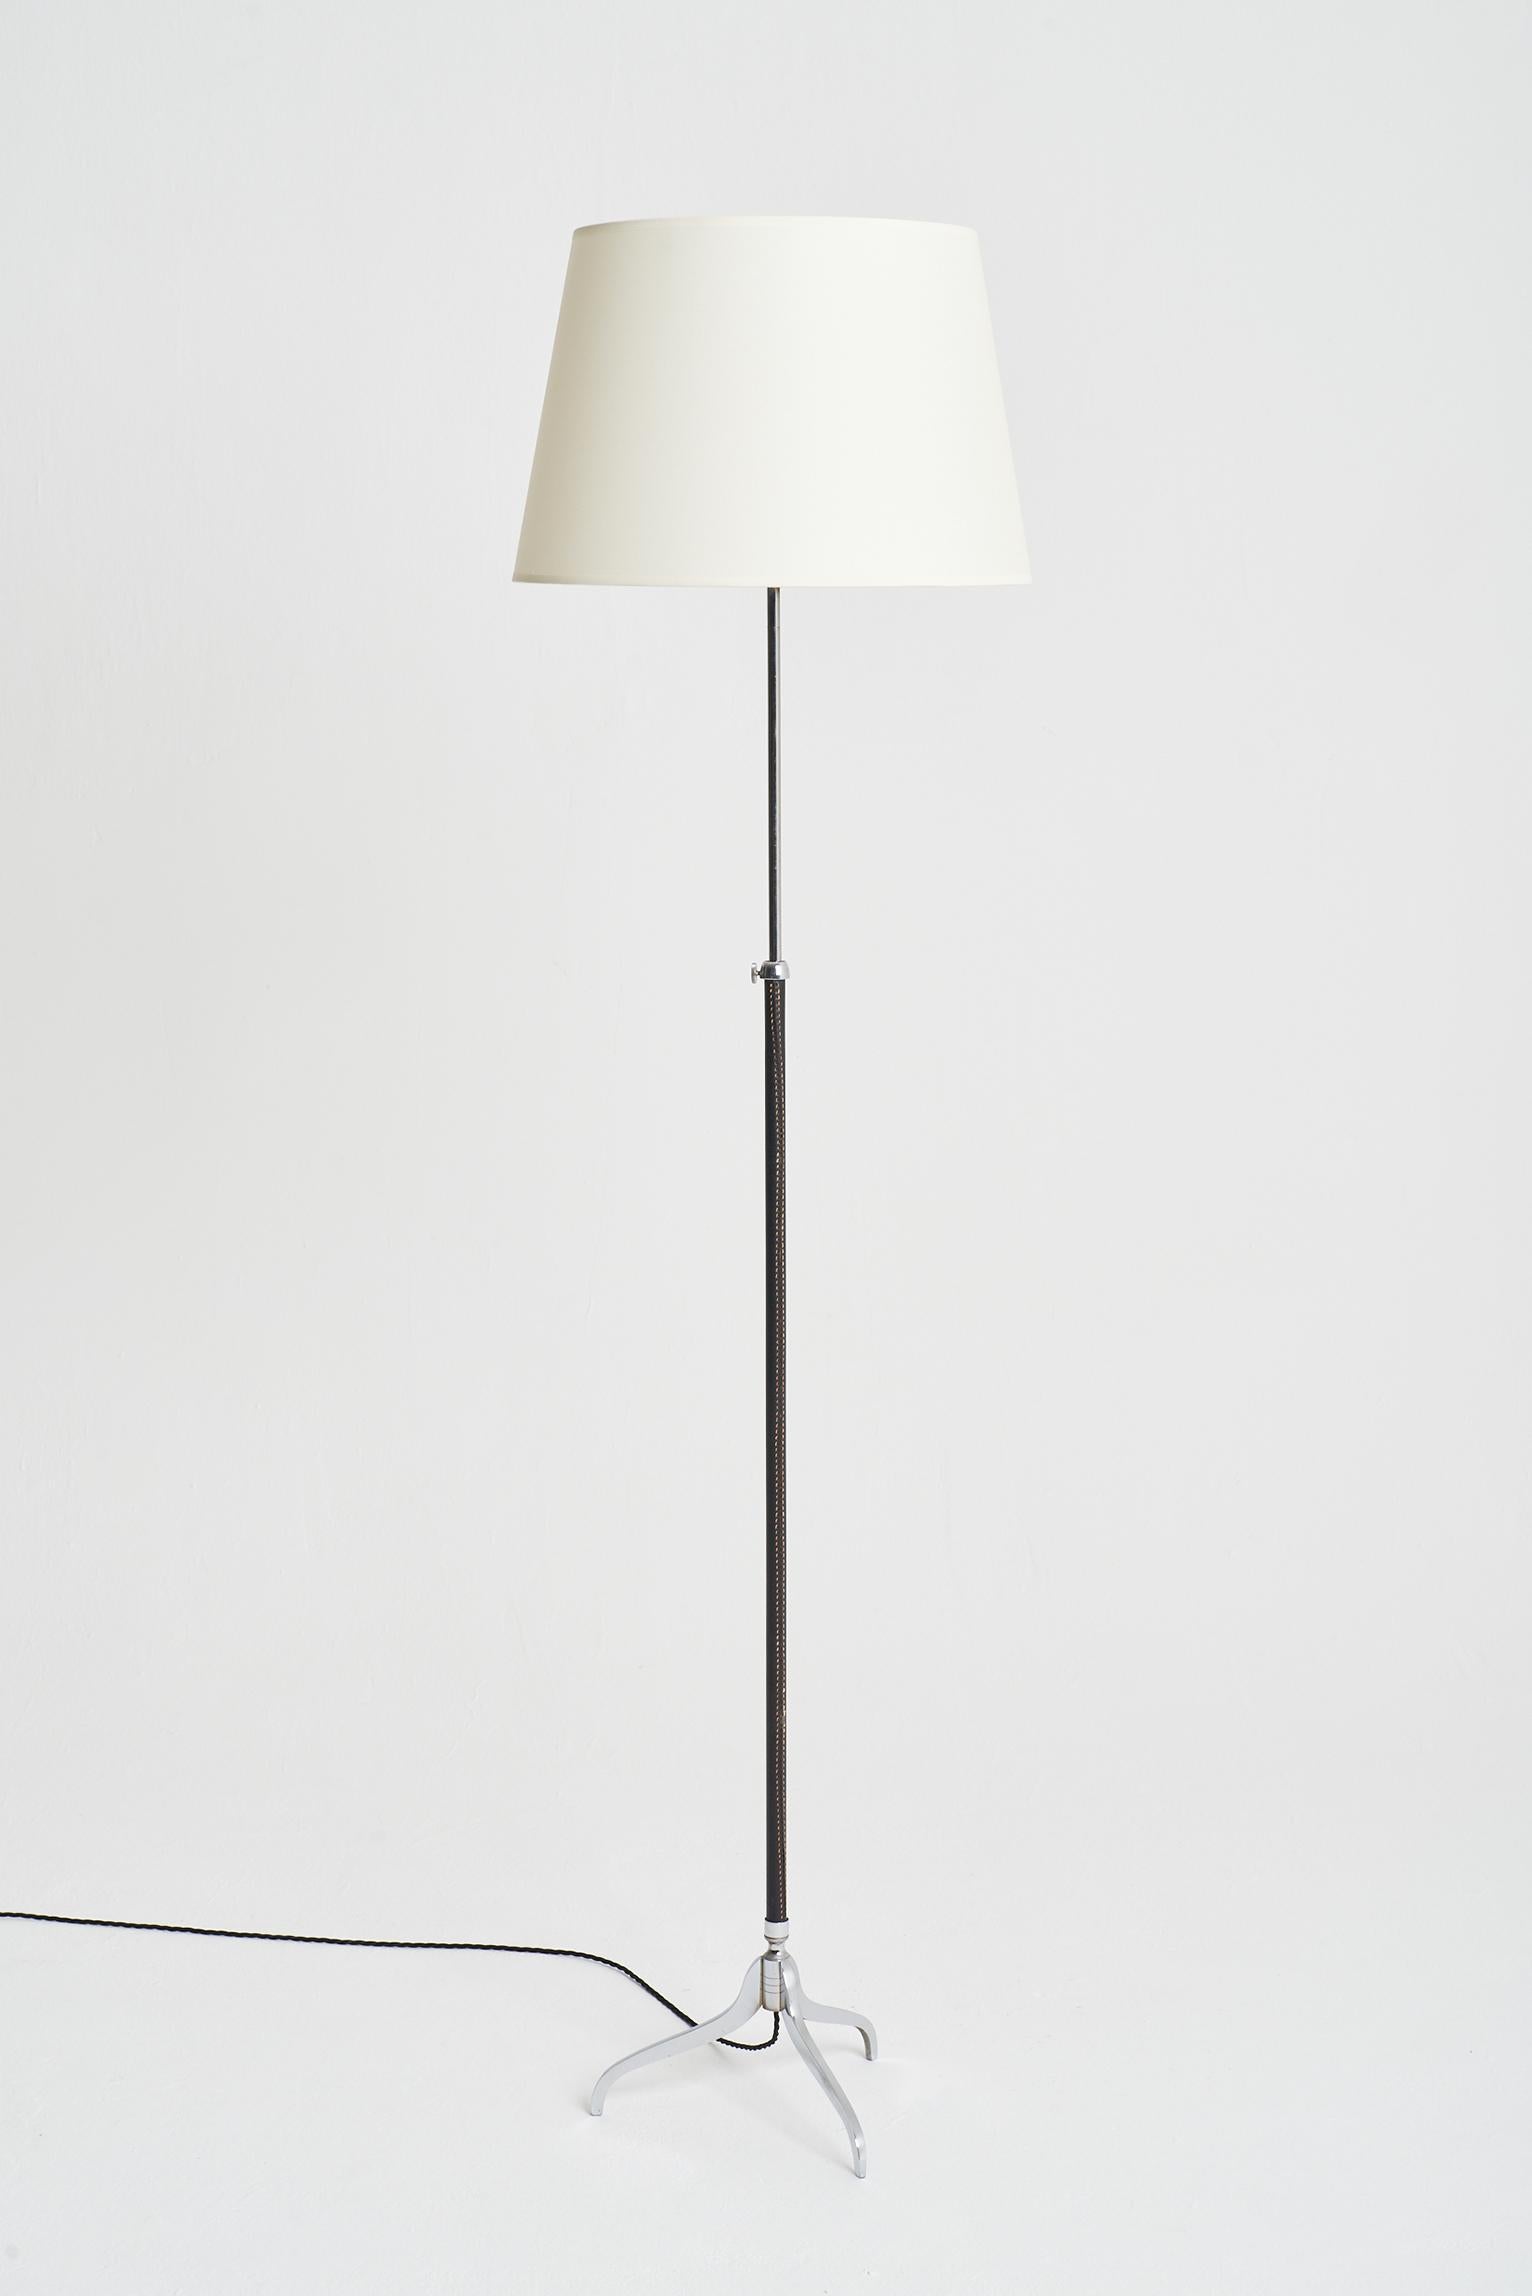 A nickel plated brass and saddle-stitched black leather floor lamp.
France, third quarter of the 20th century.